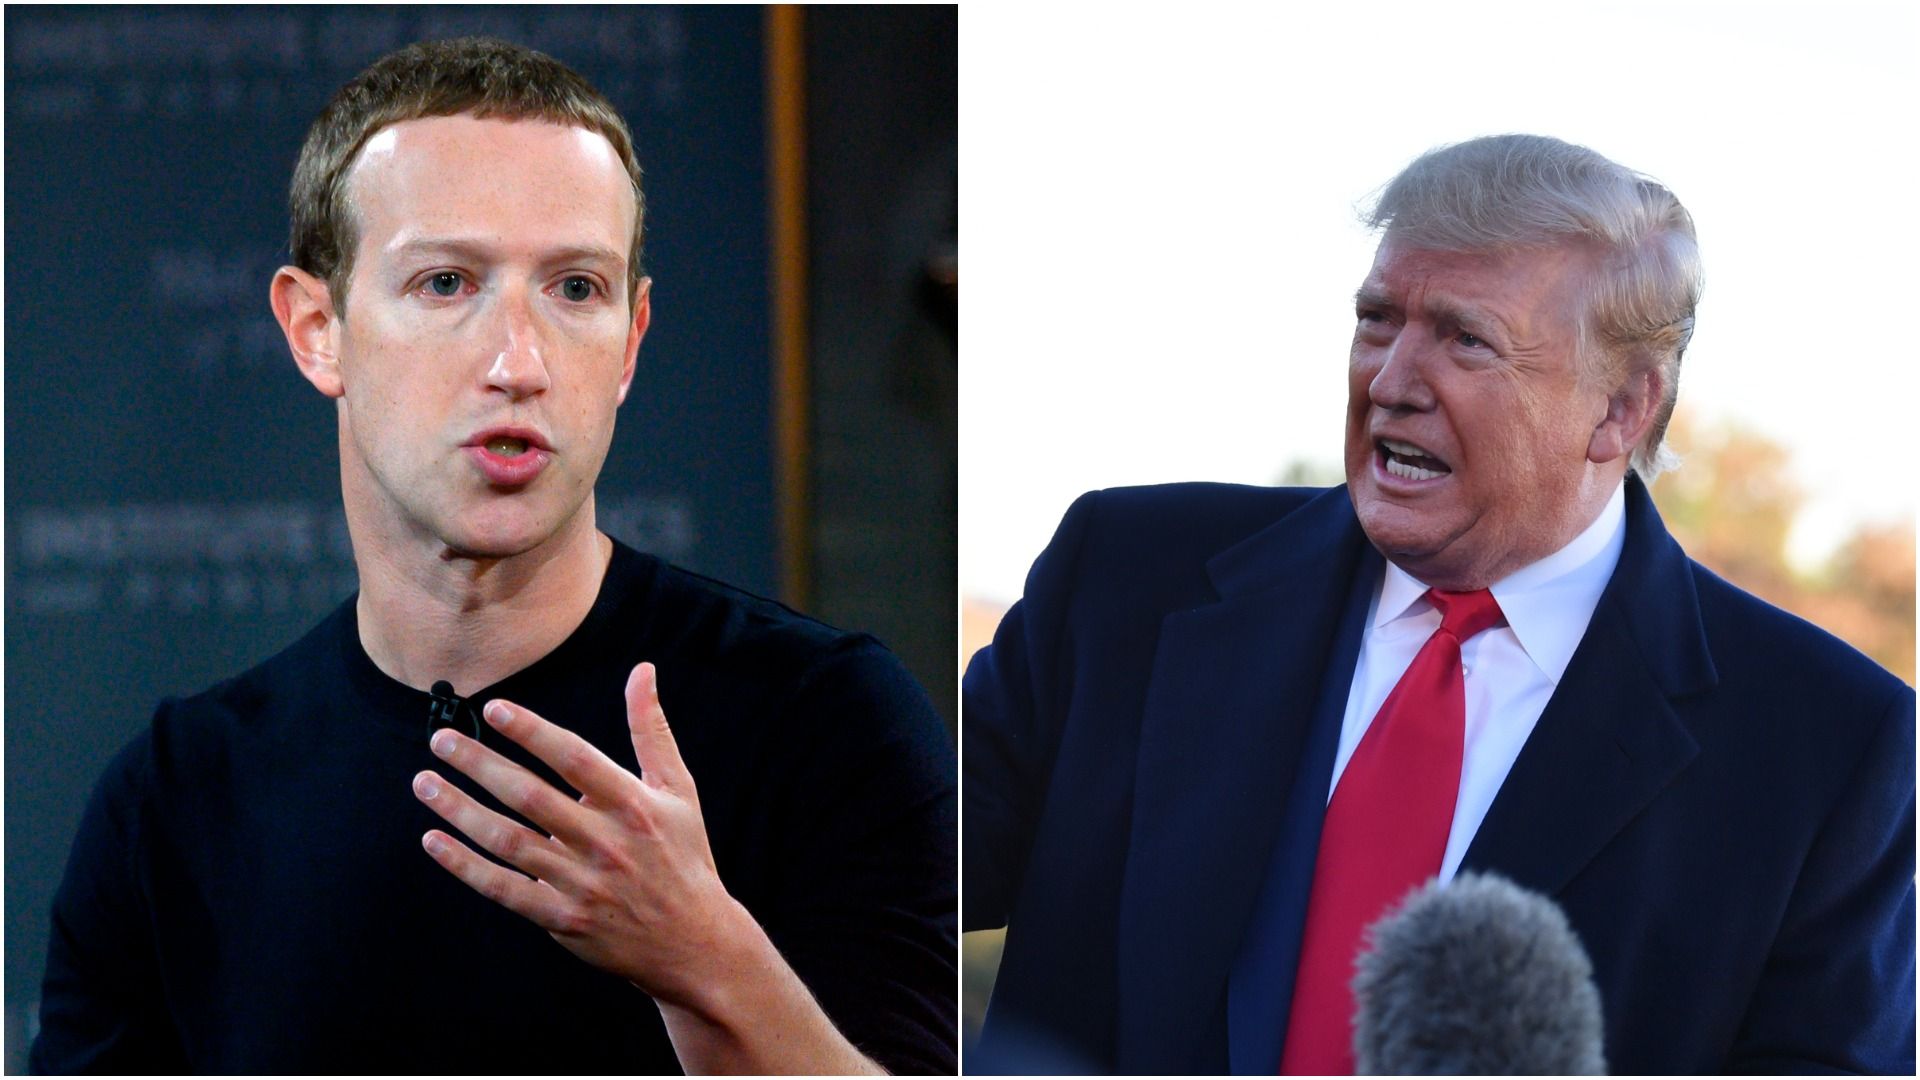 In this split picture, Mark Zuckerberg and Donald Trump are on either side.